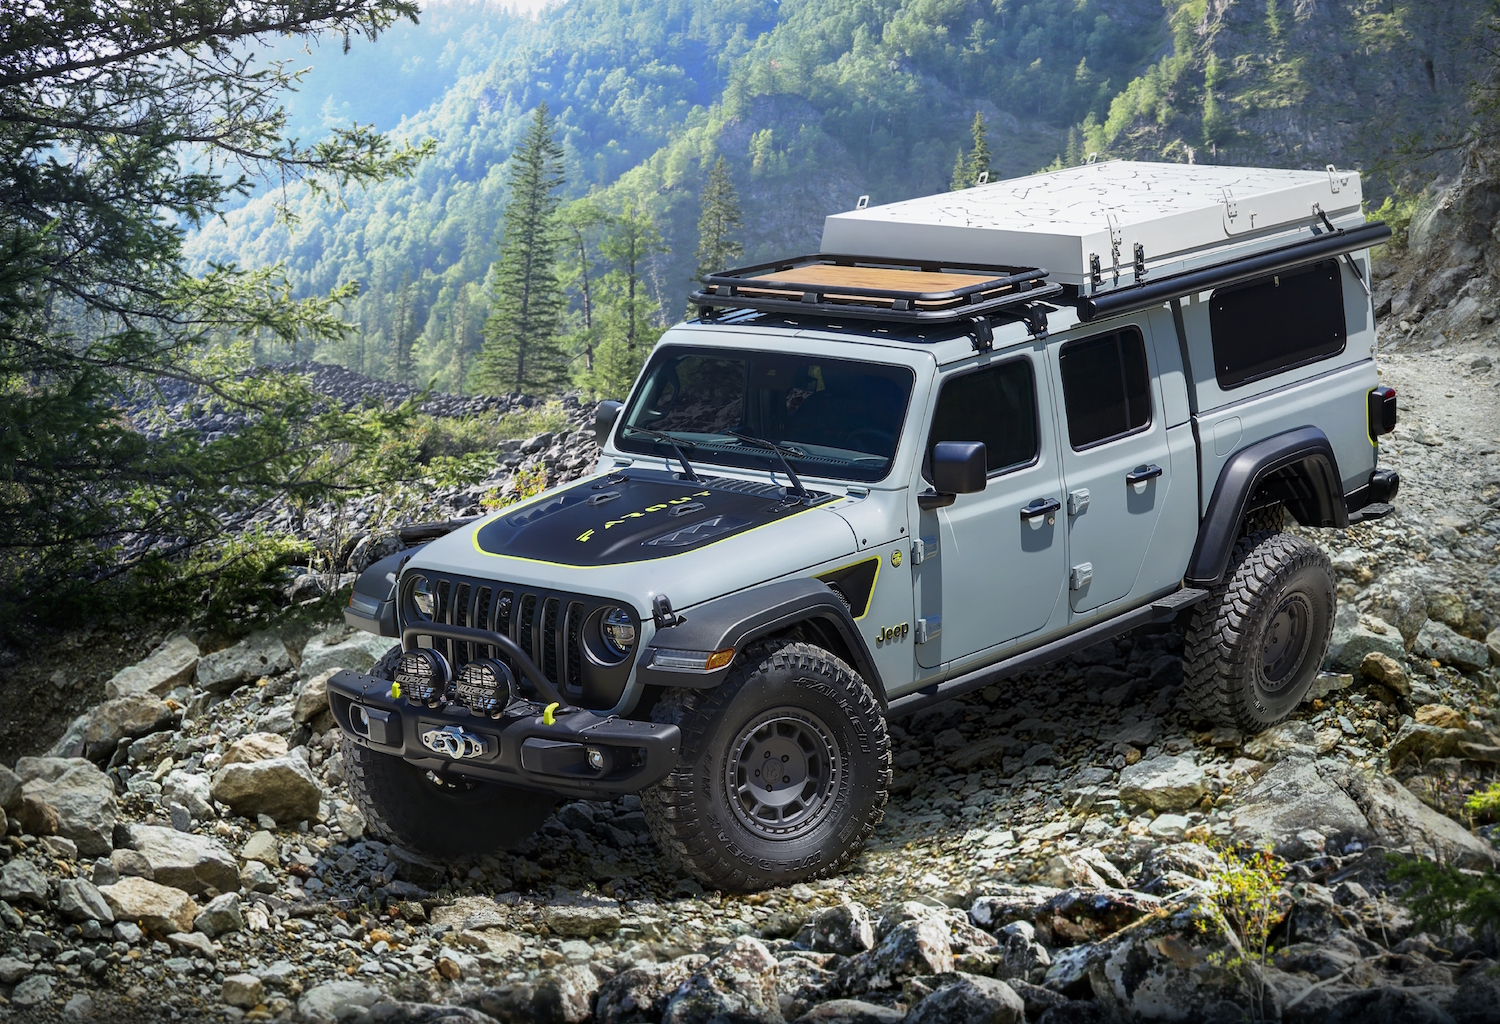 Jeep Gladiator Farout Concept from Moab Easter Safari 2021